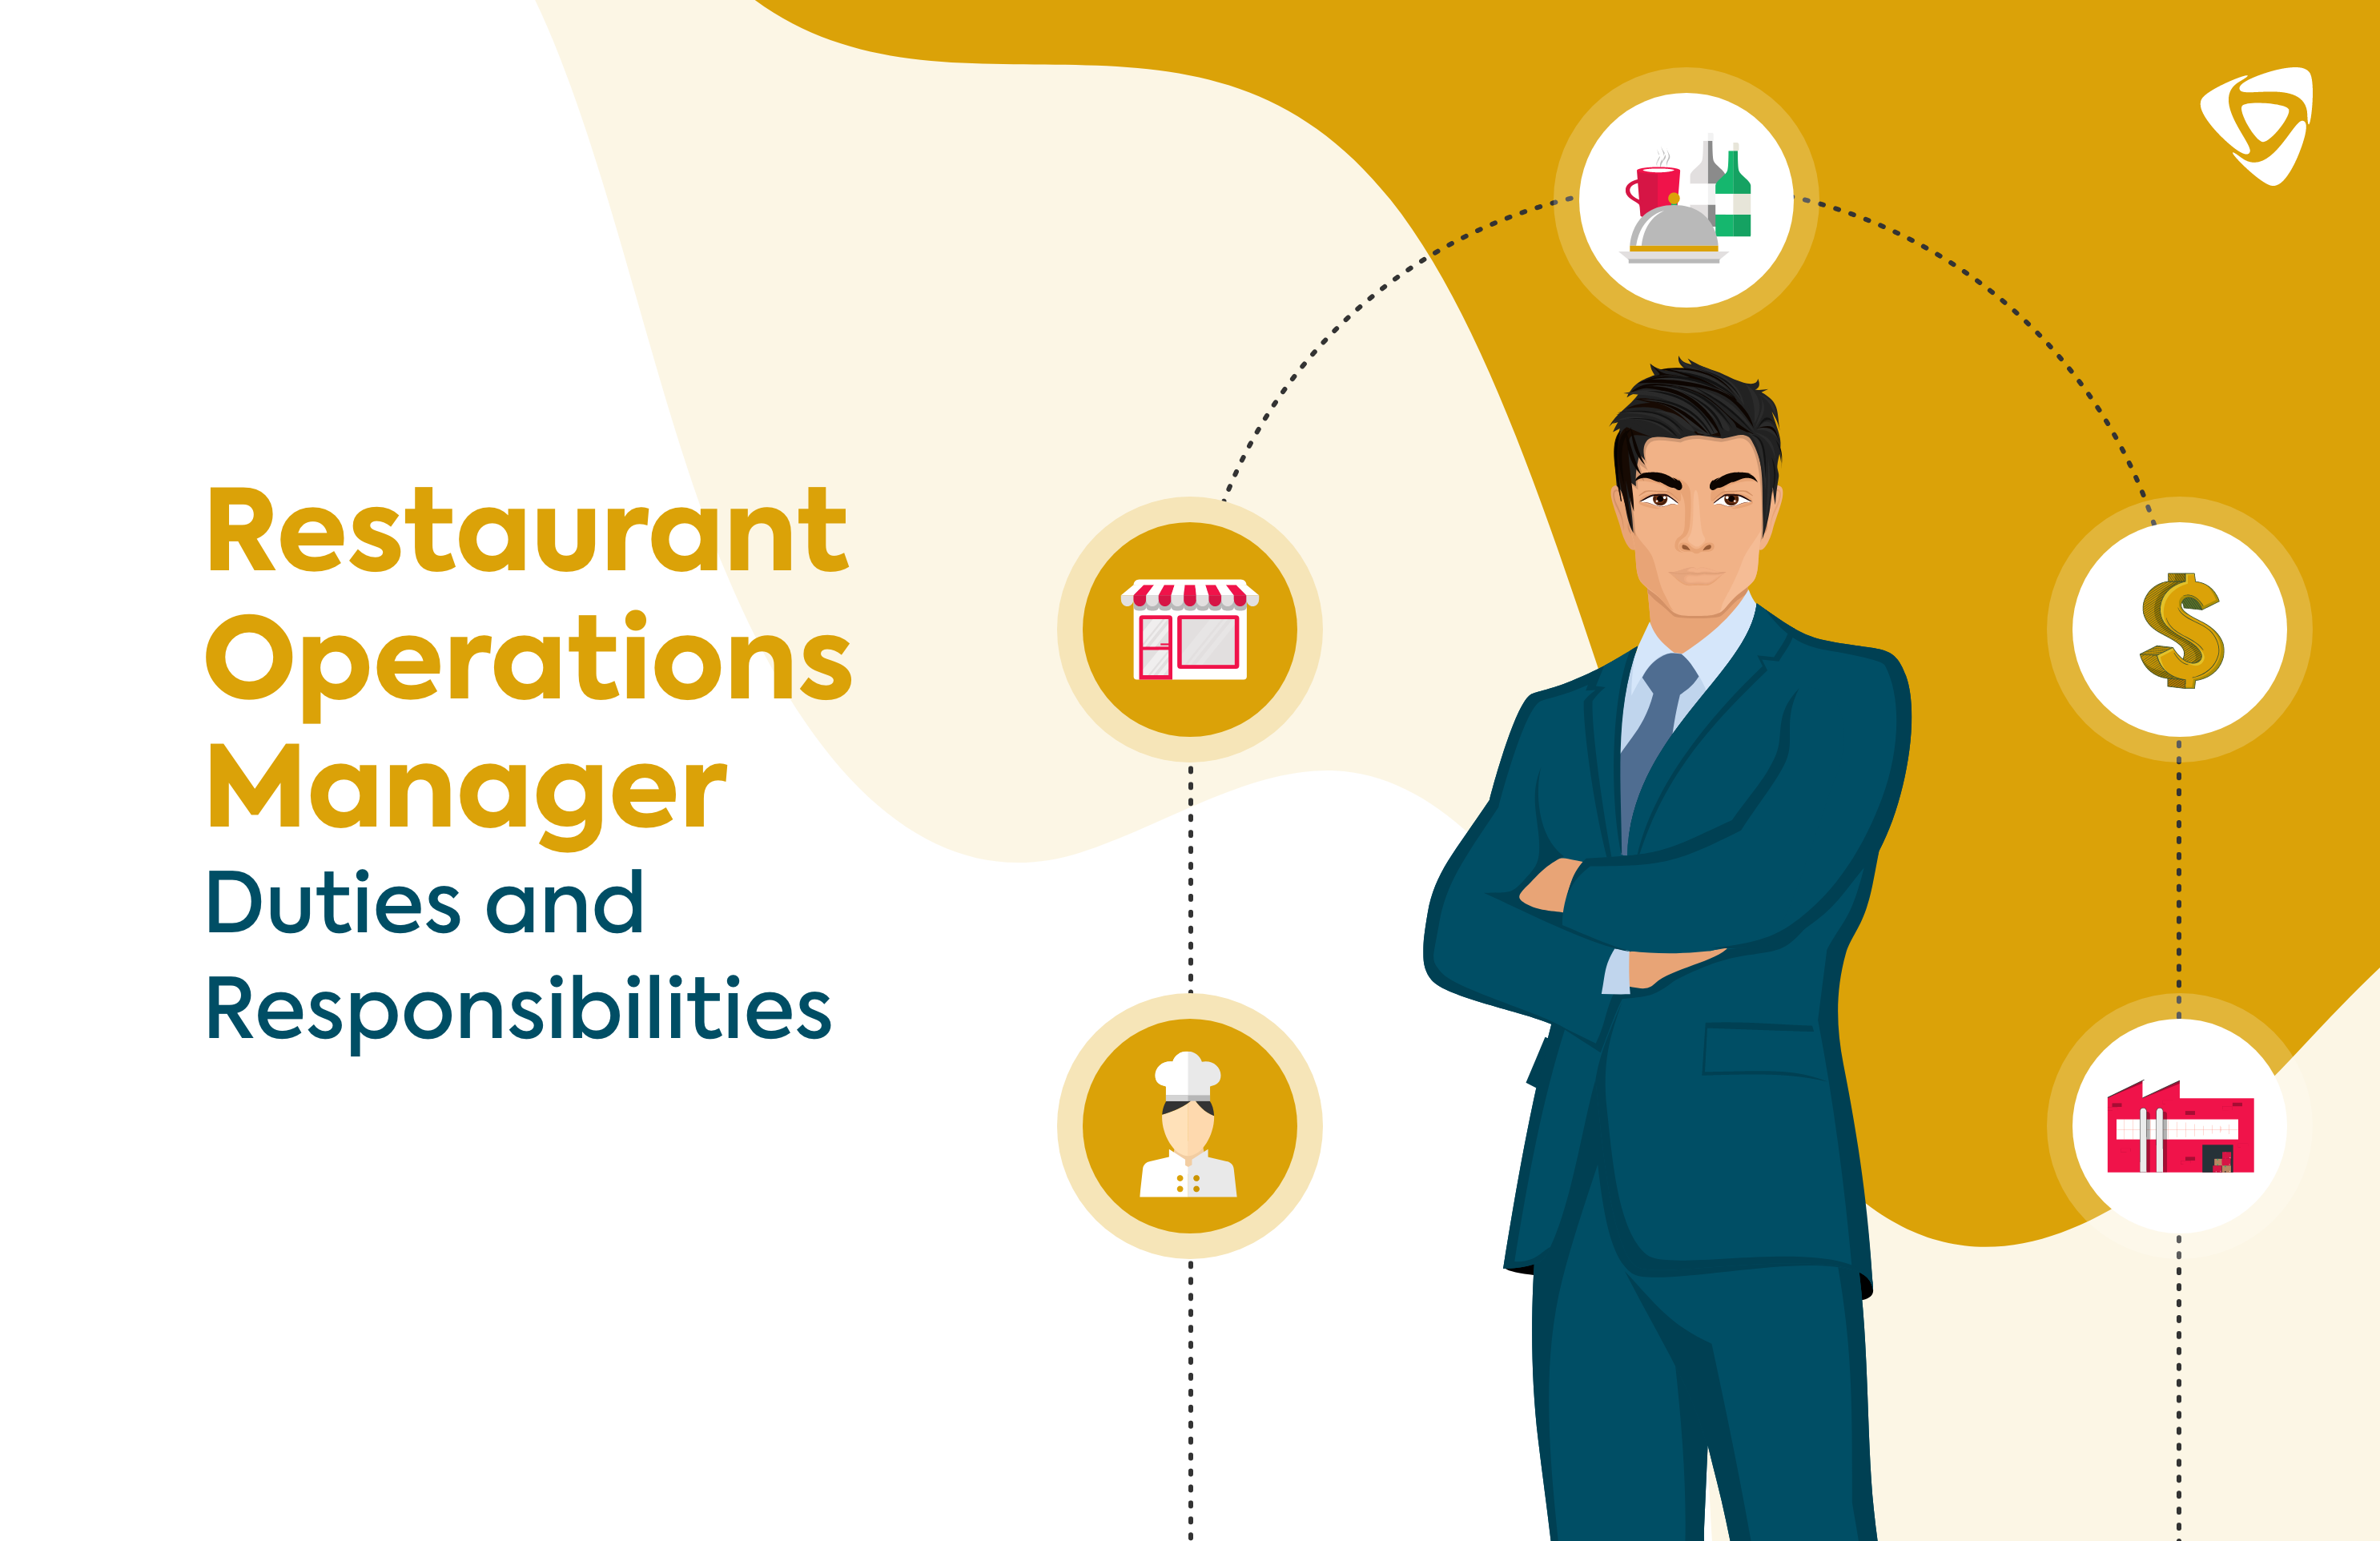 Restaurant Operations Manager Duties and Responsibilities